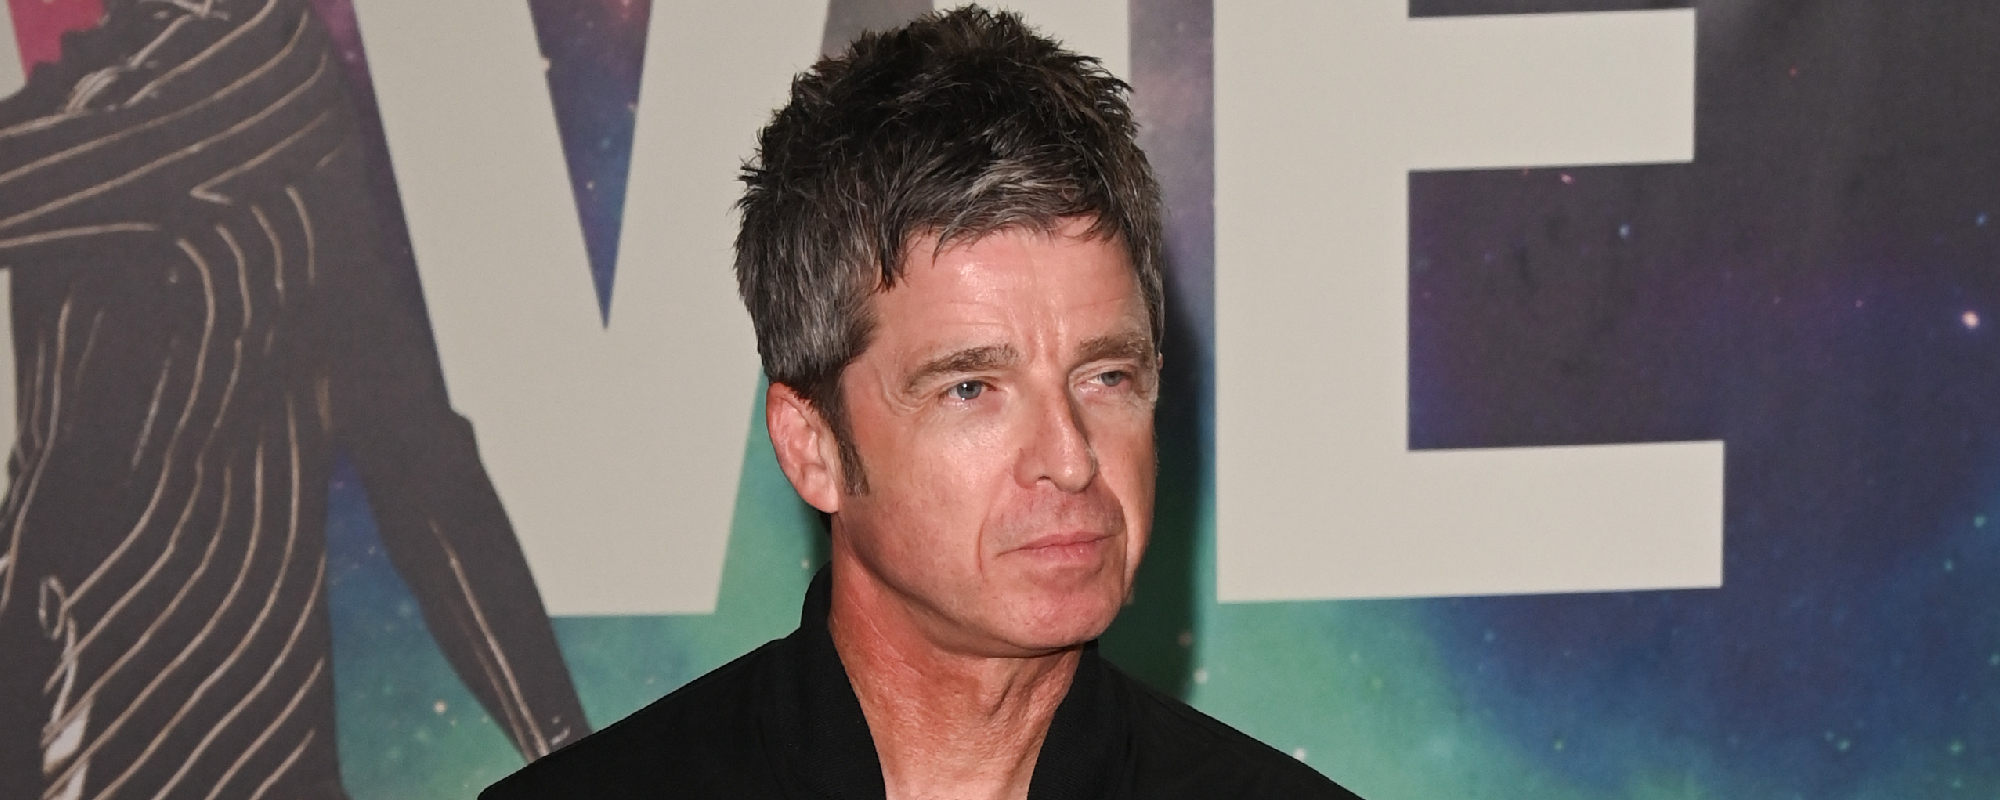 Noel Gallagher Performs Oasis’ “Stand by Me” for the First Time With New Rock Band